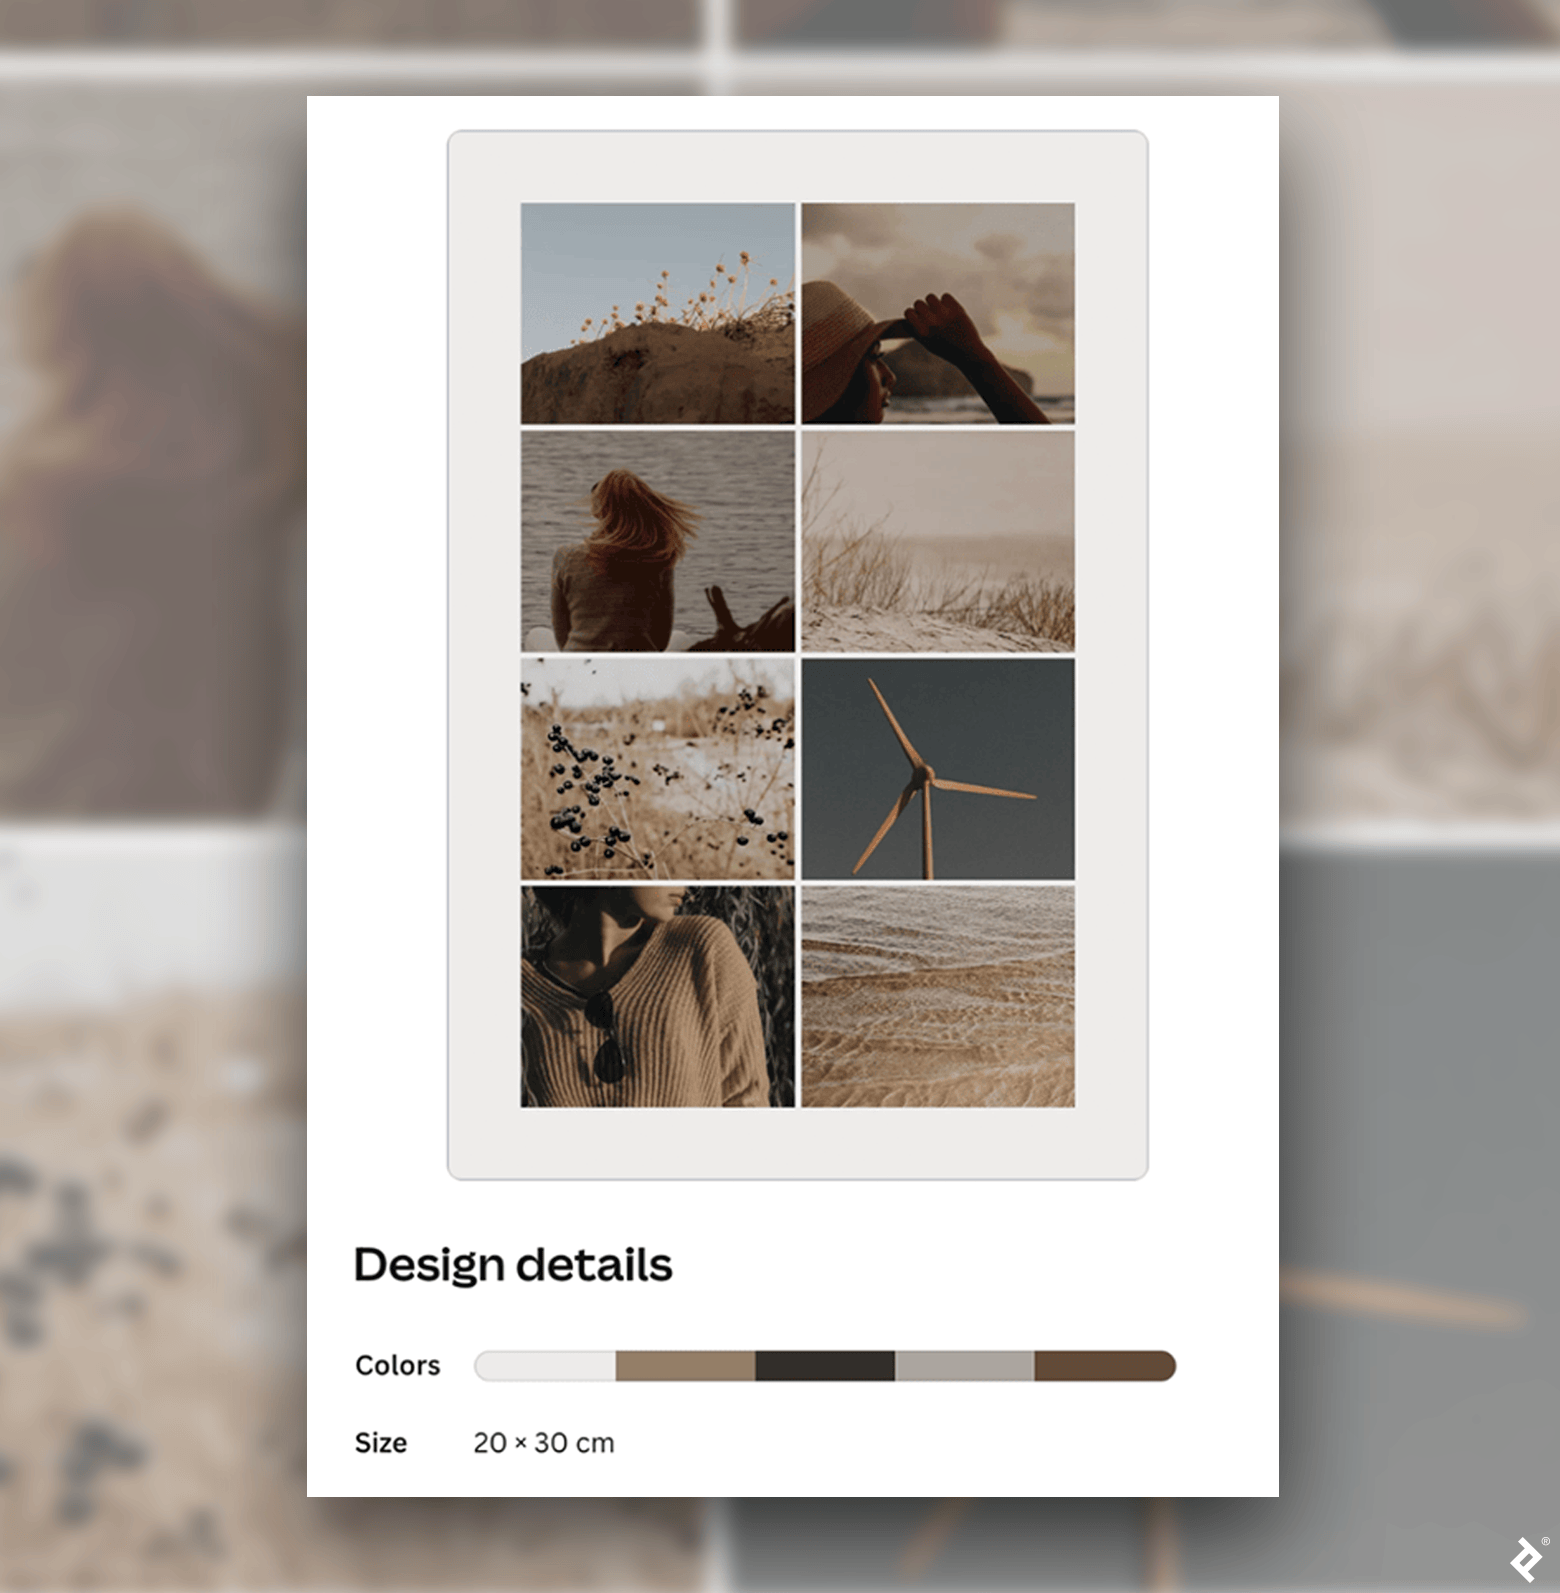 A mood board photo collage from Canva includes photos showcasing various shades of beige and gray.